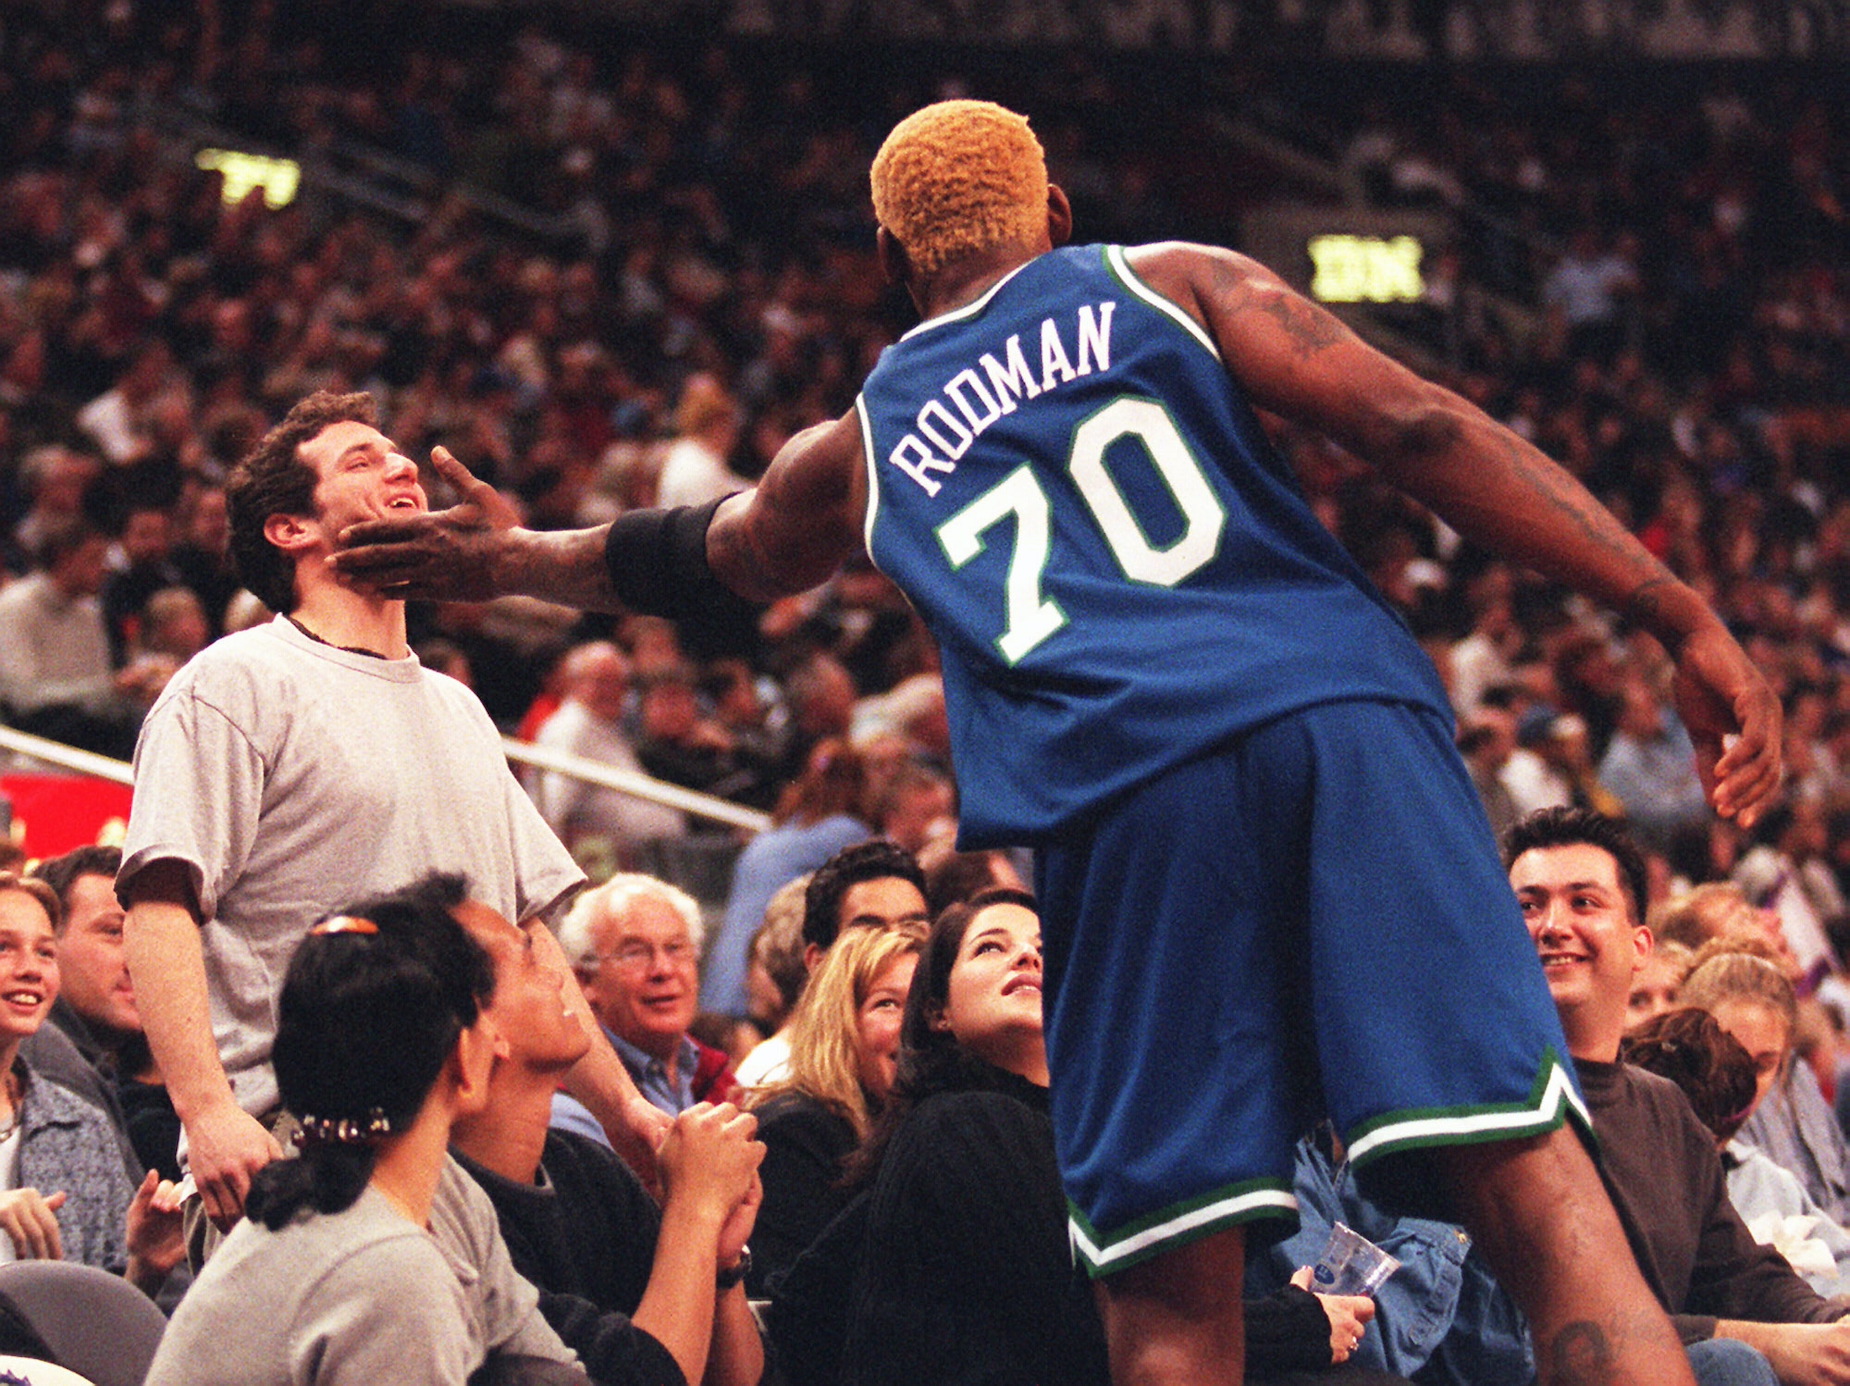 Dennis Rodman Tried to Wear a No. 69 Jersey, but David Stern and the NBA  Refused to Allow It